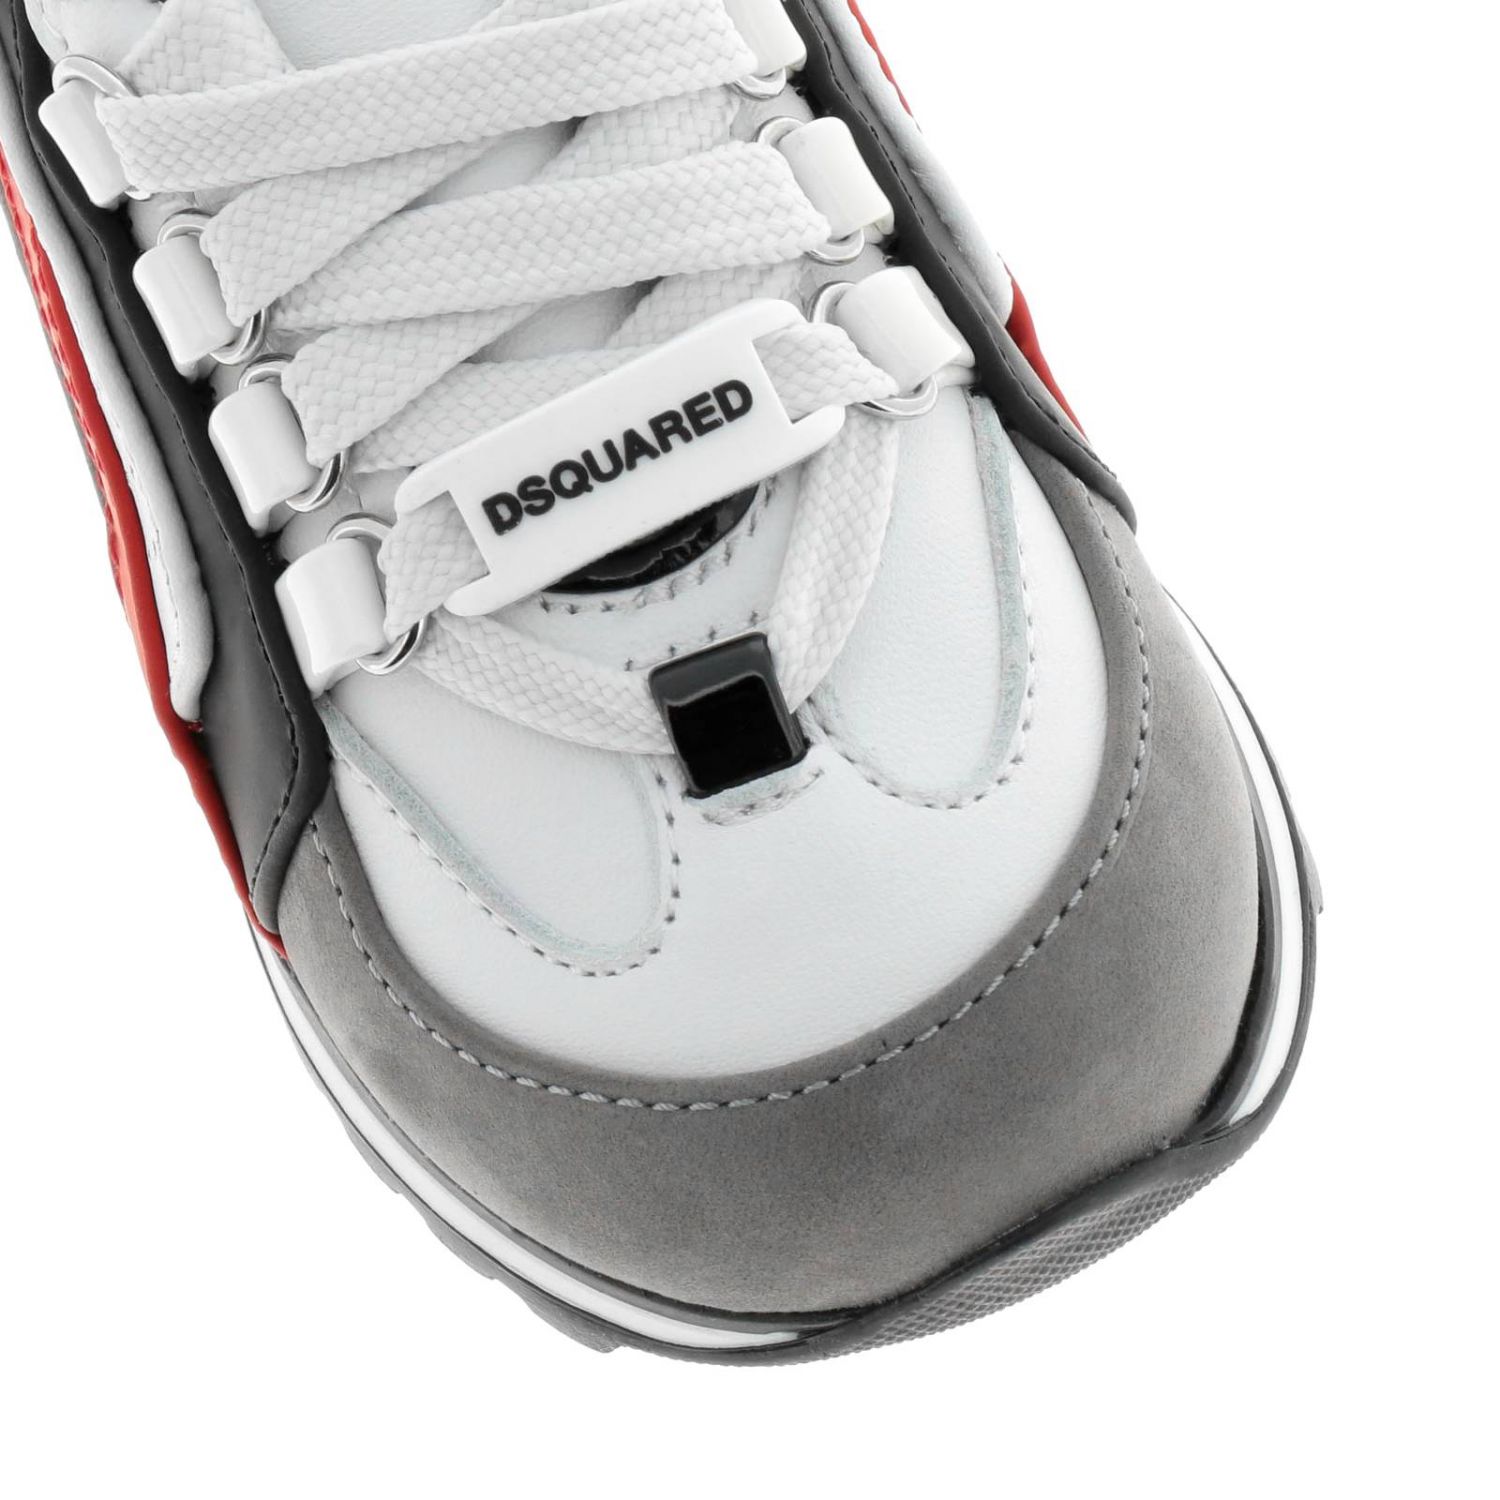 dsquared baby shoes